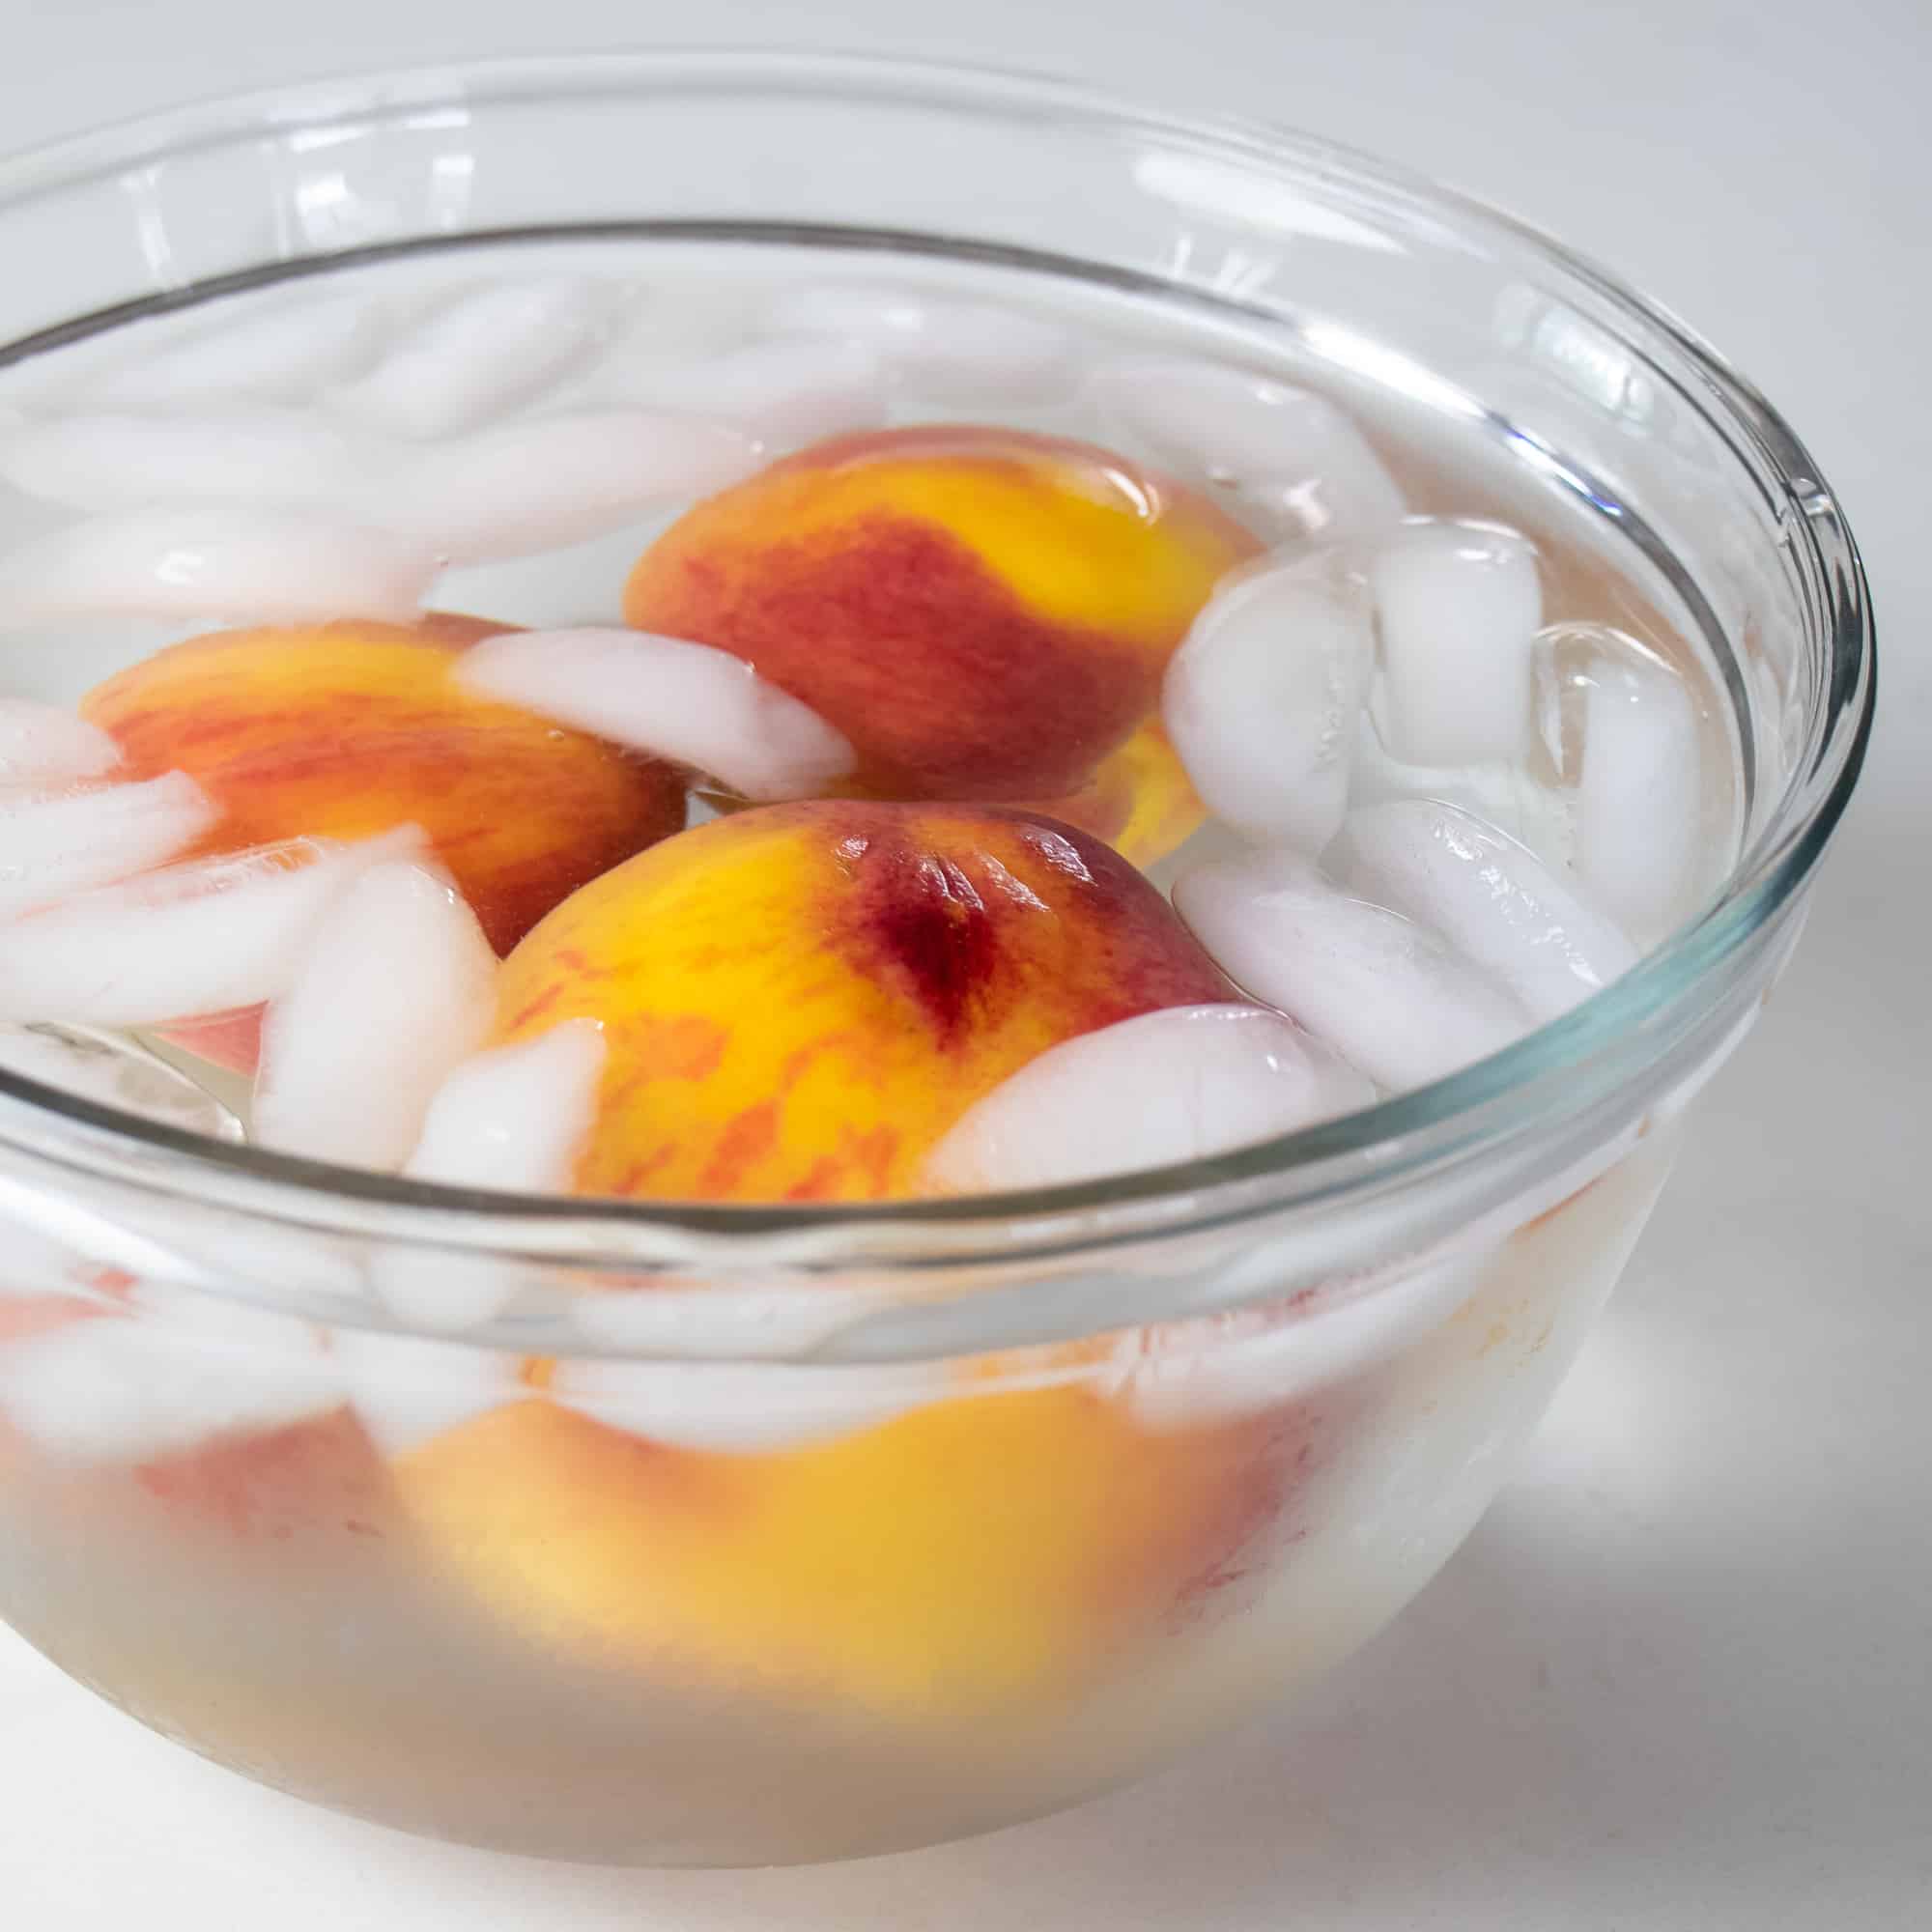 Drop the peaches in ice water